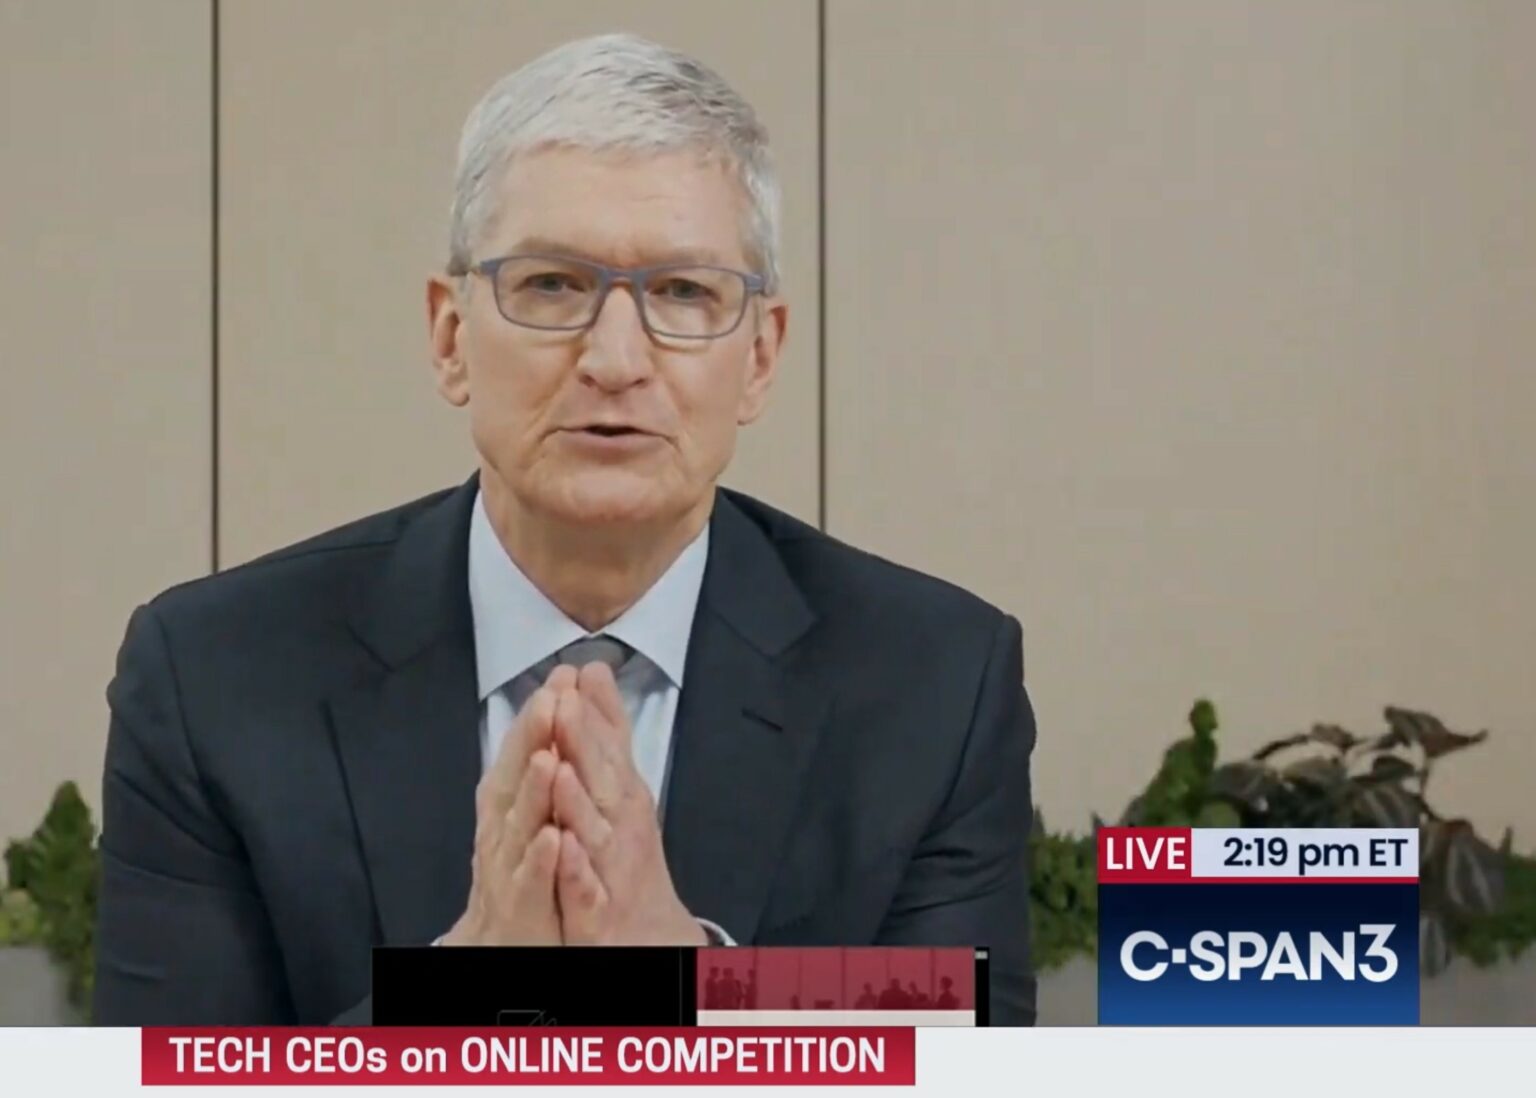 Tim Cook answers questions about App Store business practices.